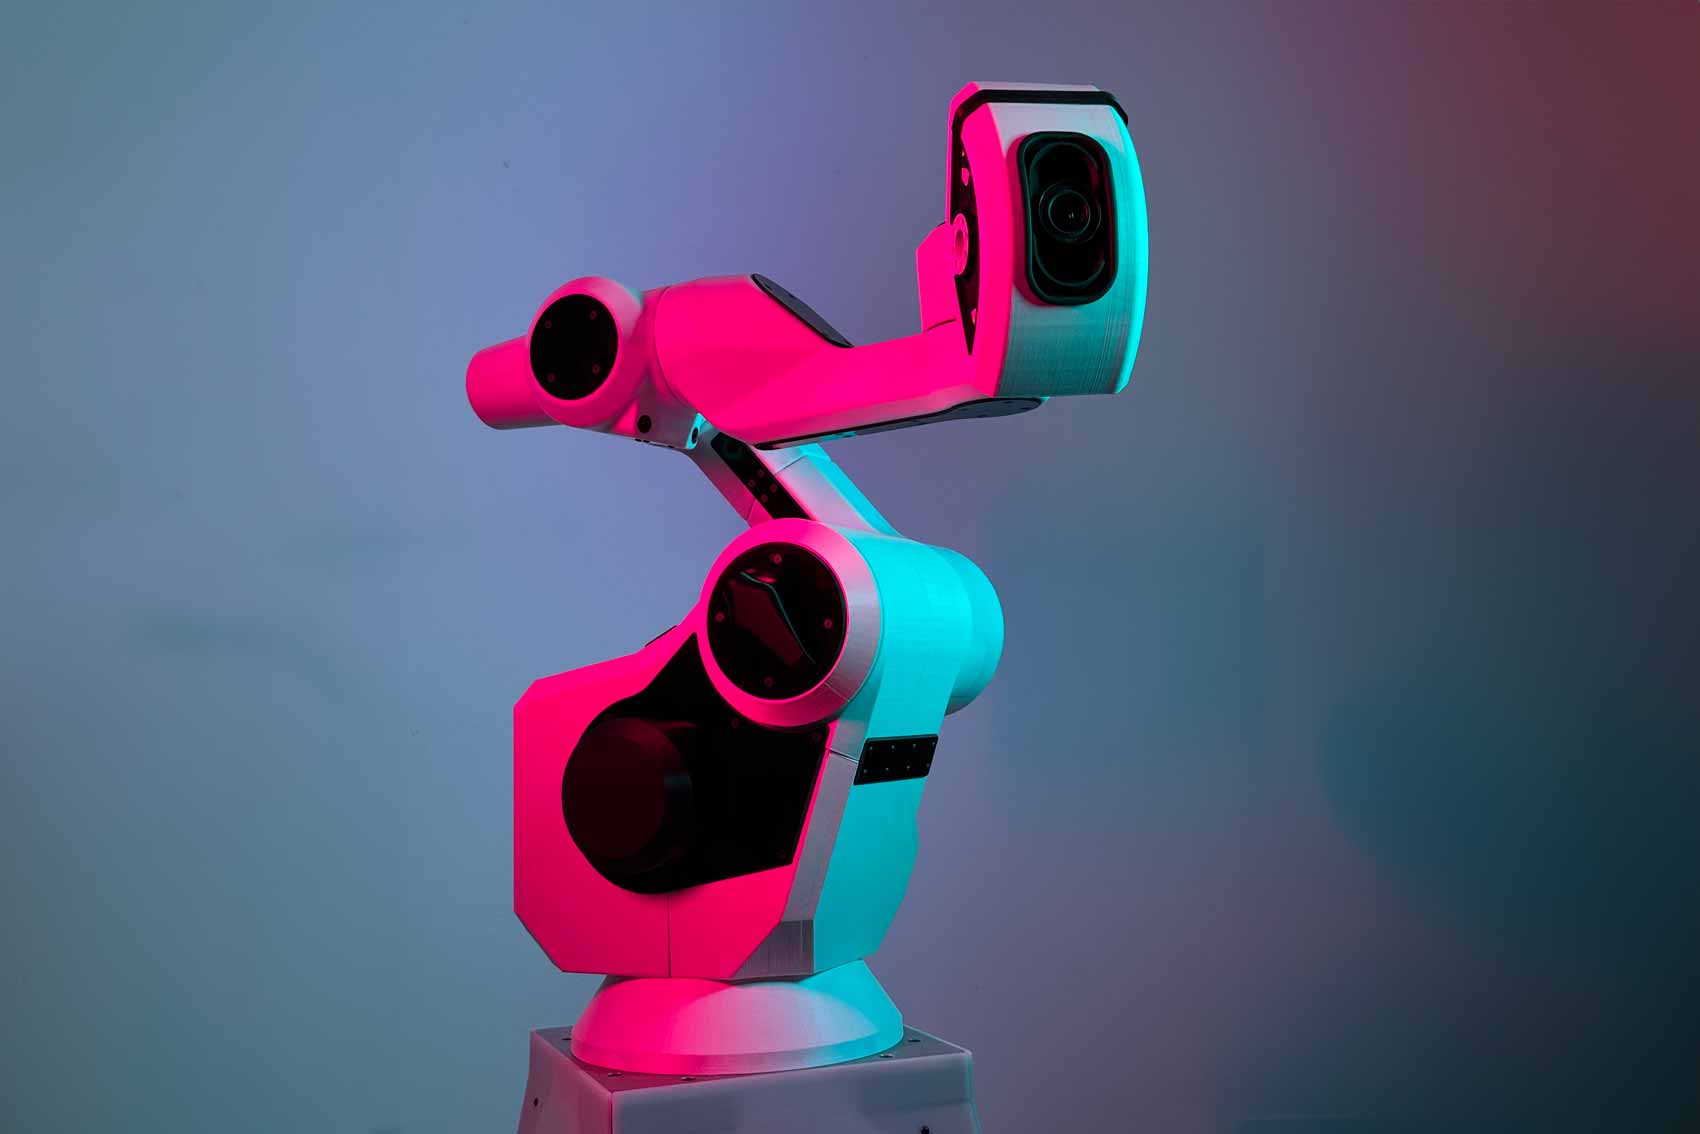 G-Bot: Oz Photo Booths new Glam Bot Arm